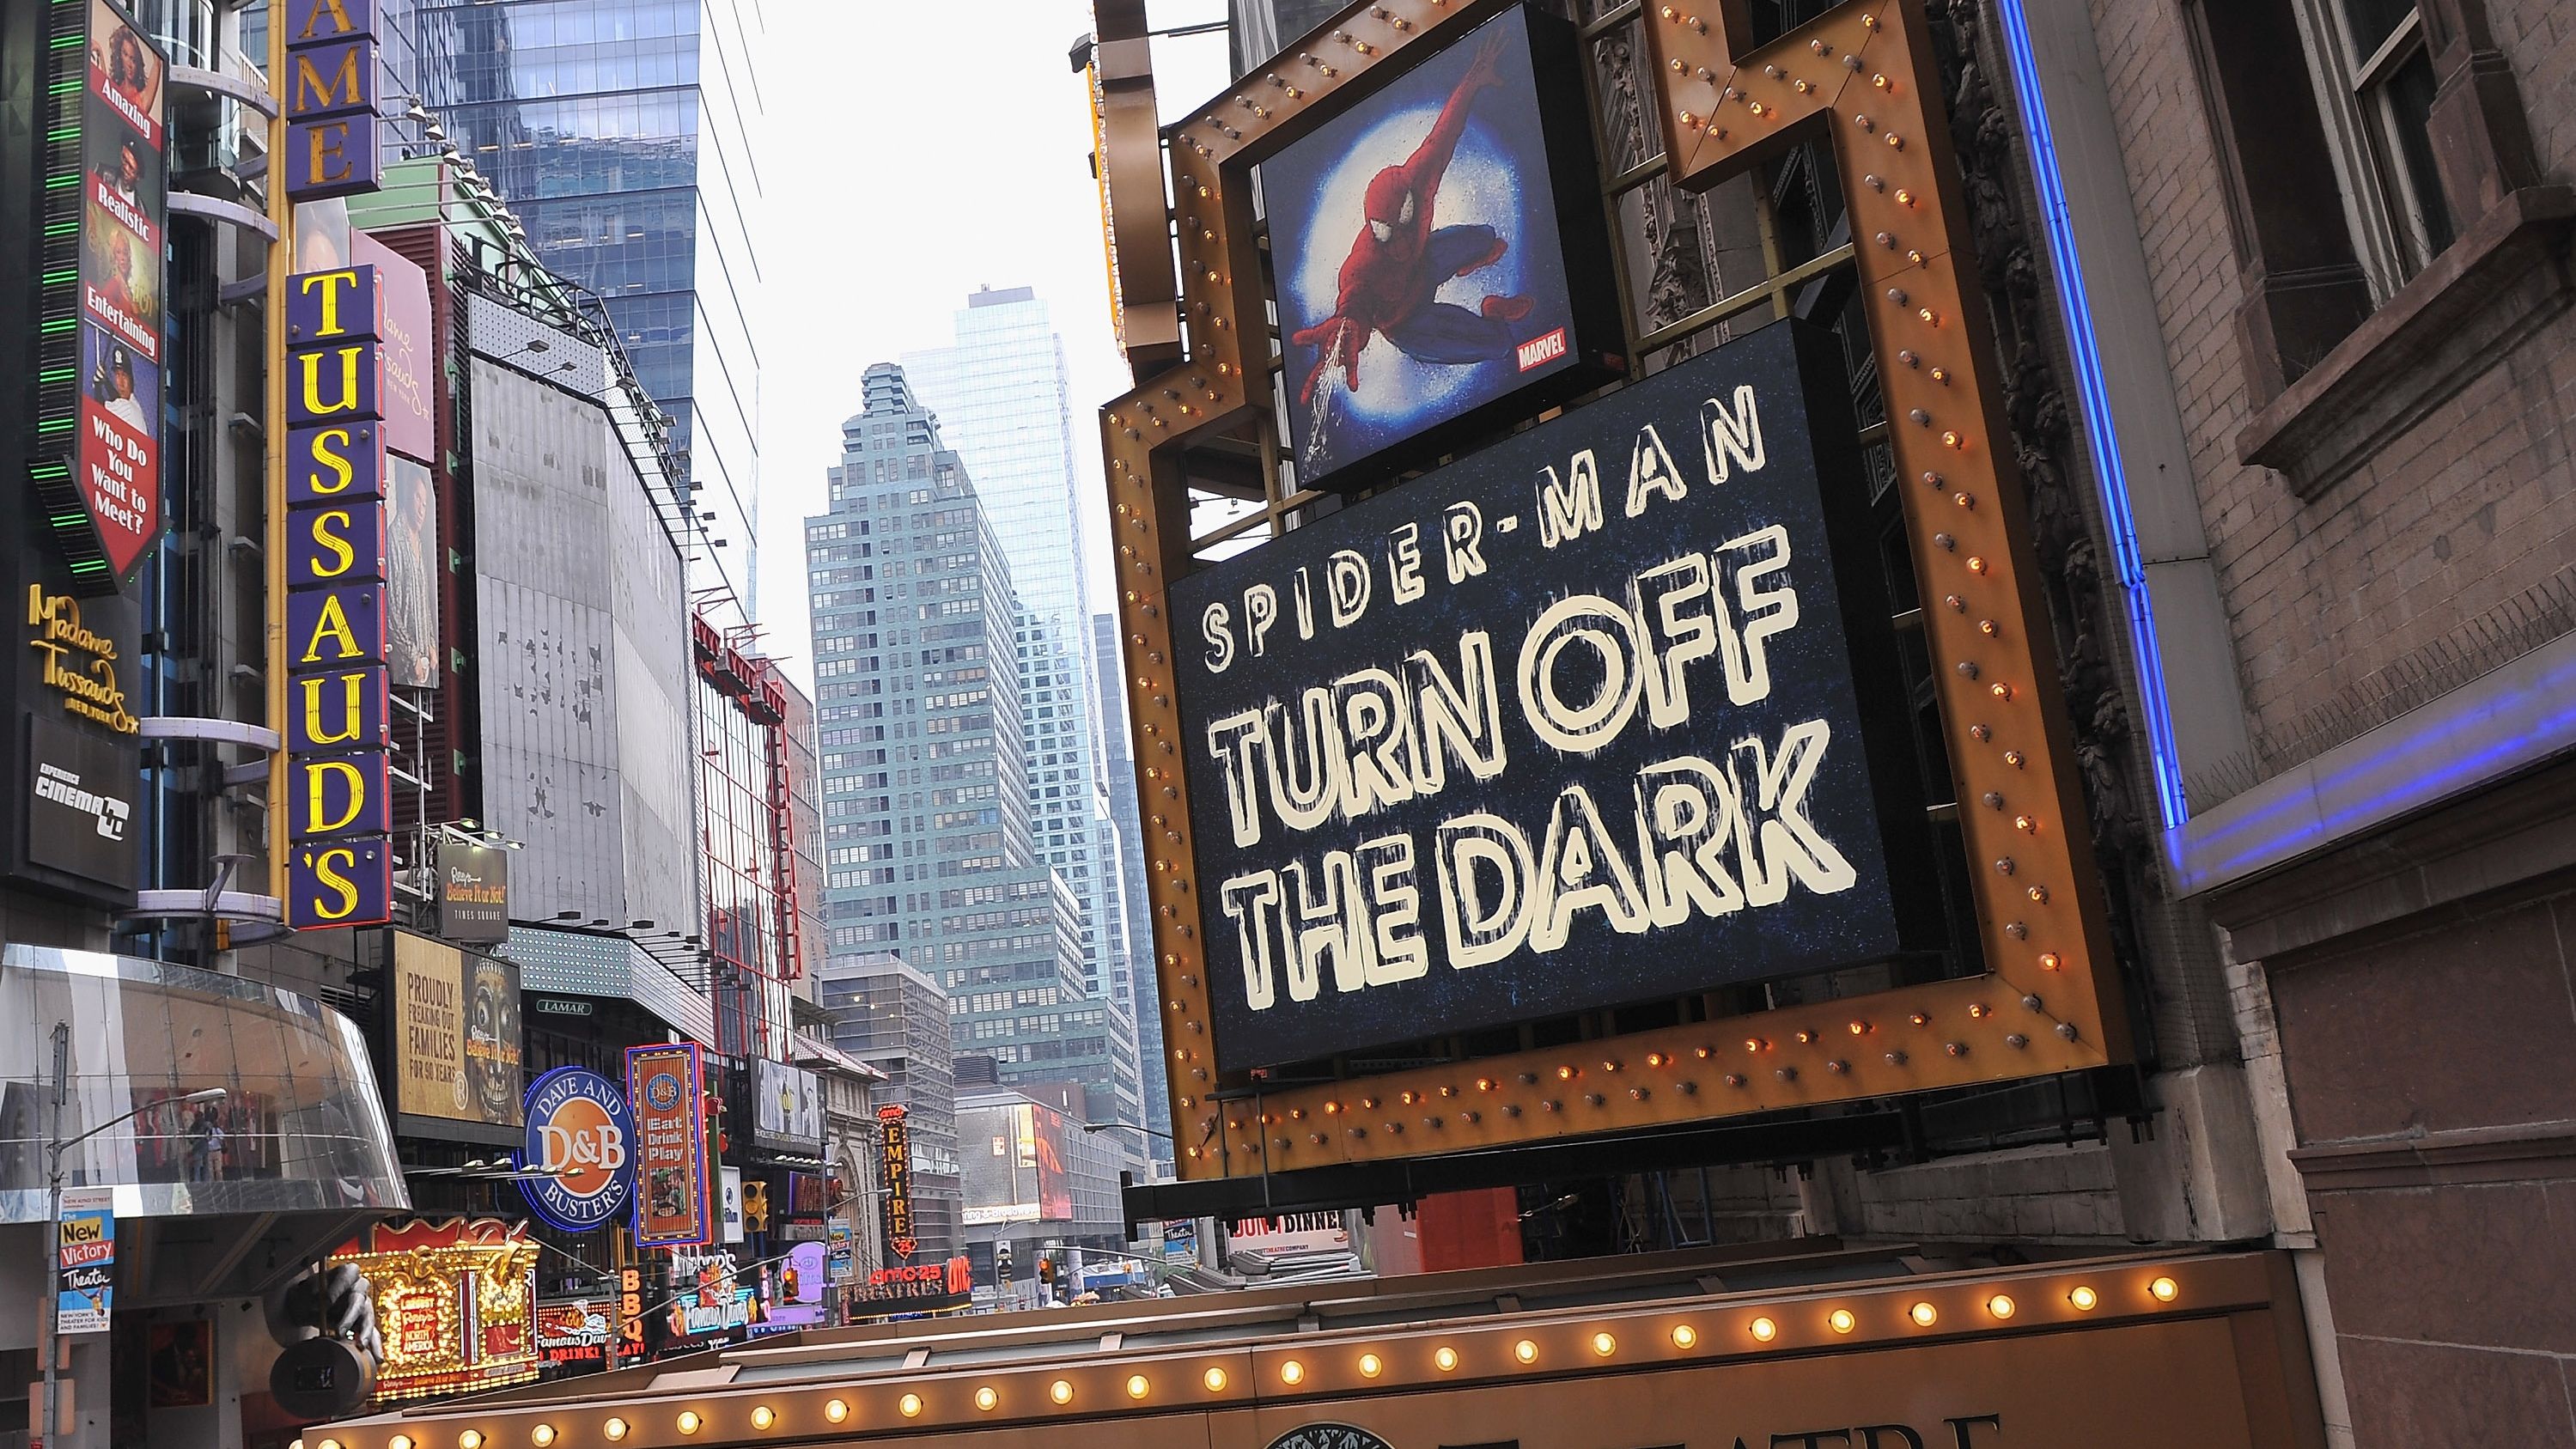 Foxwoods Theatre' marquee of "Spider-Man Turn Off The Dark" in 2012 in New York City.